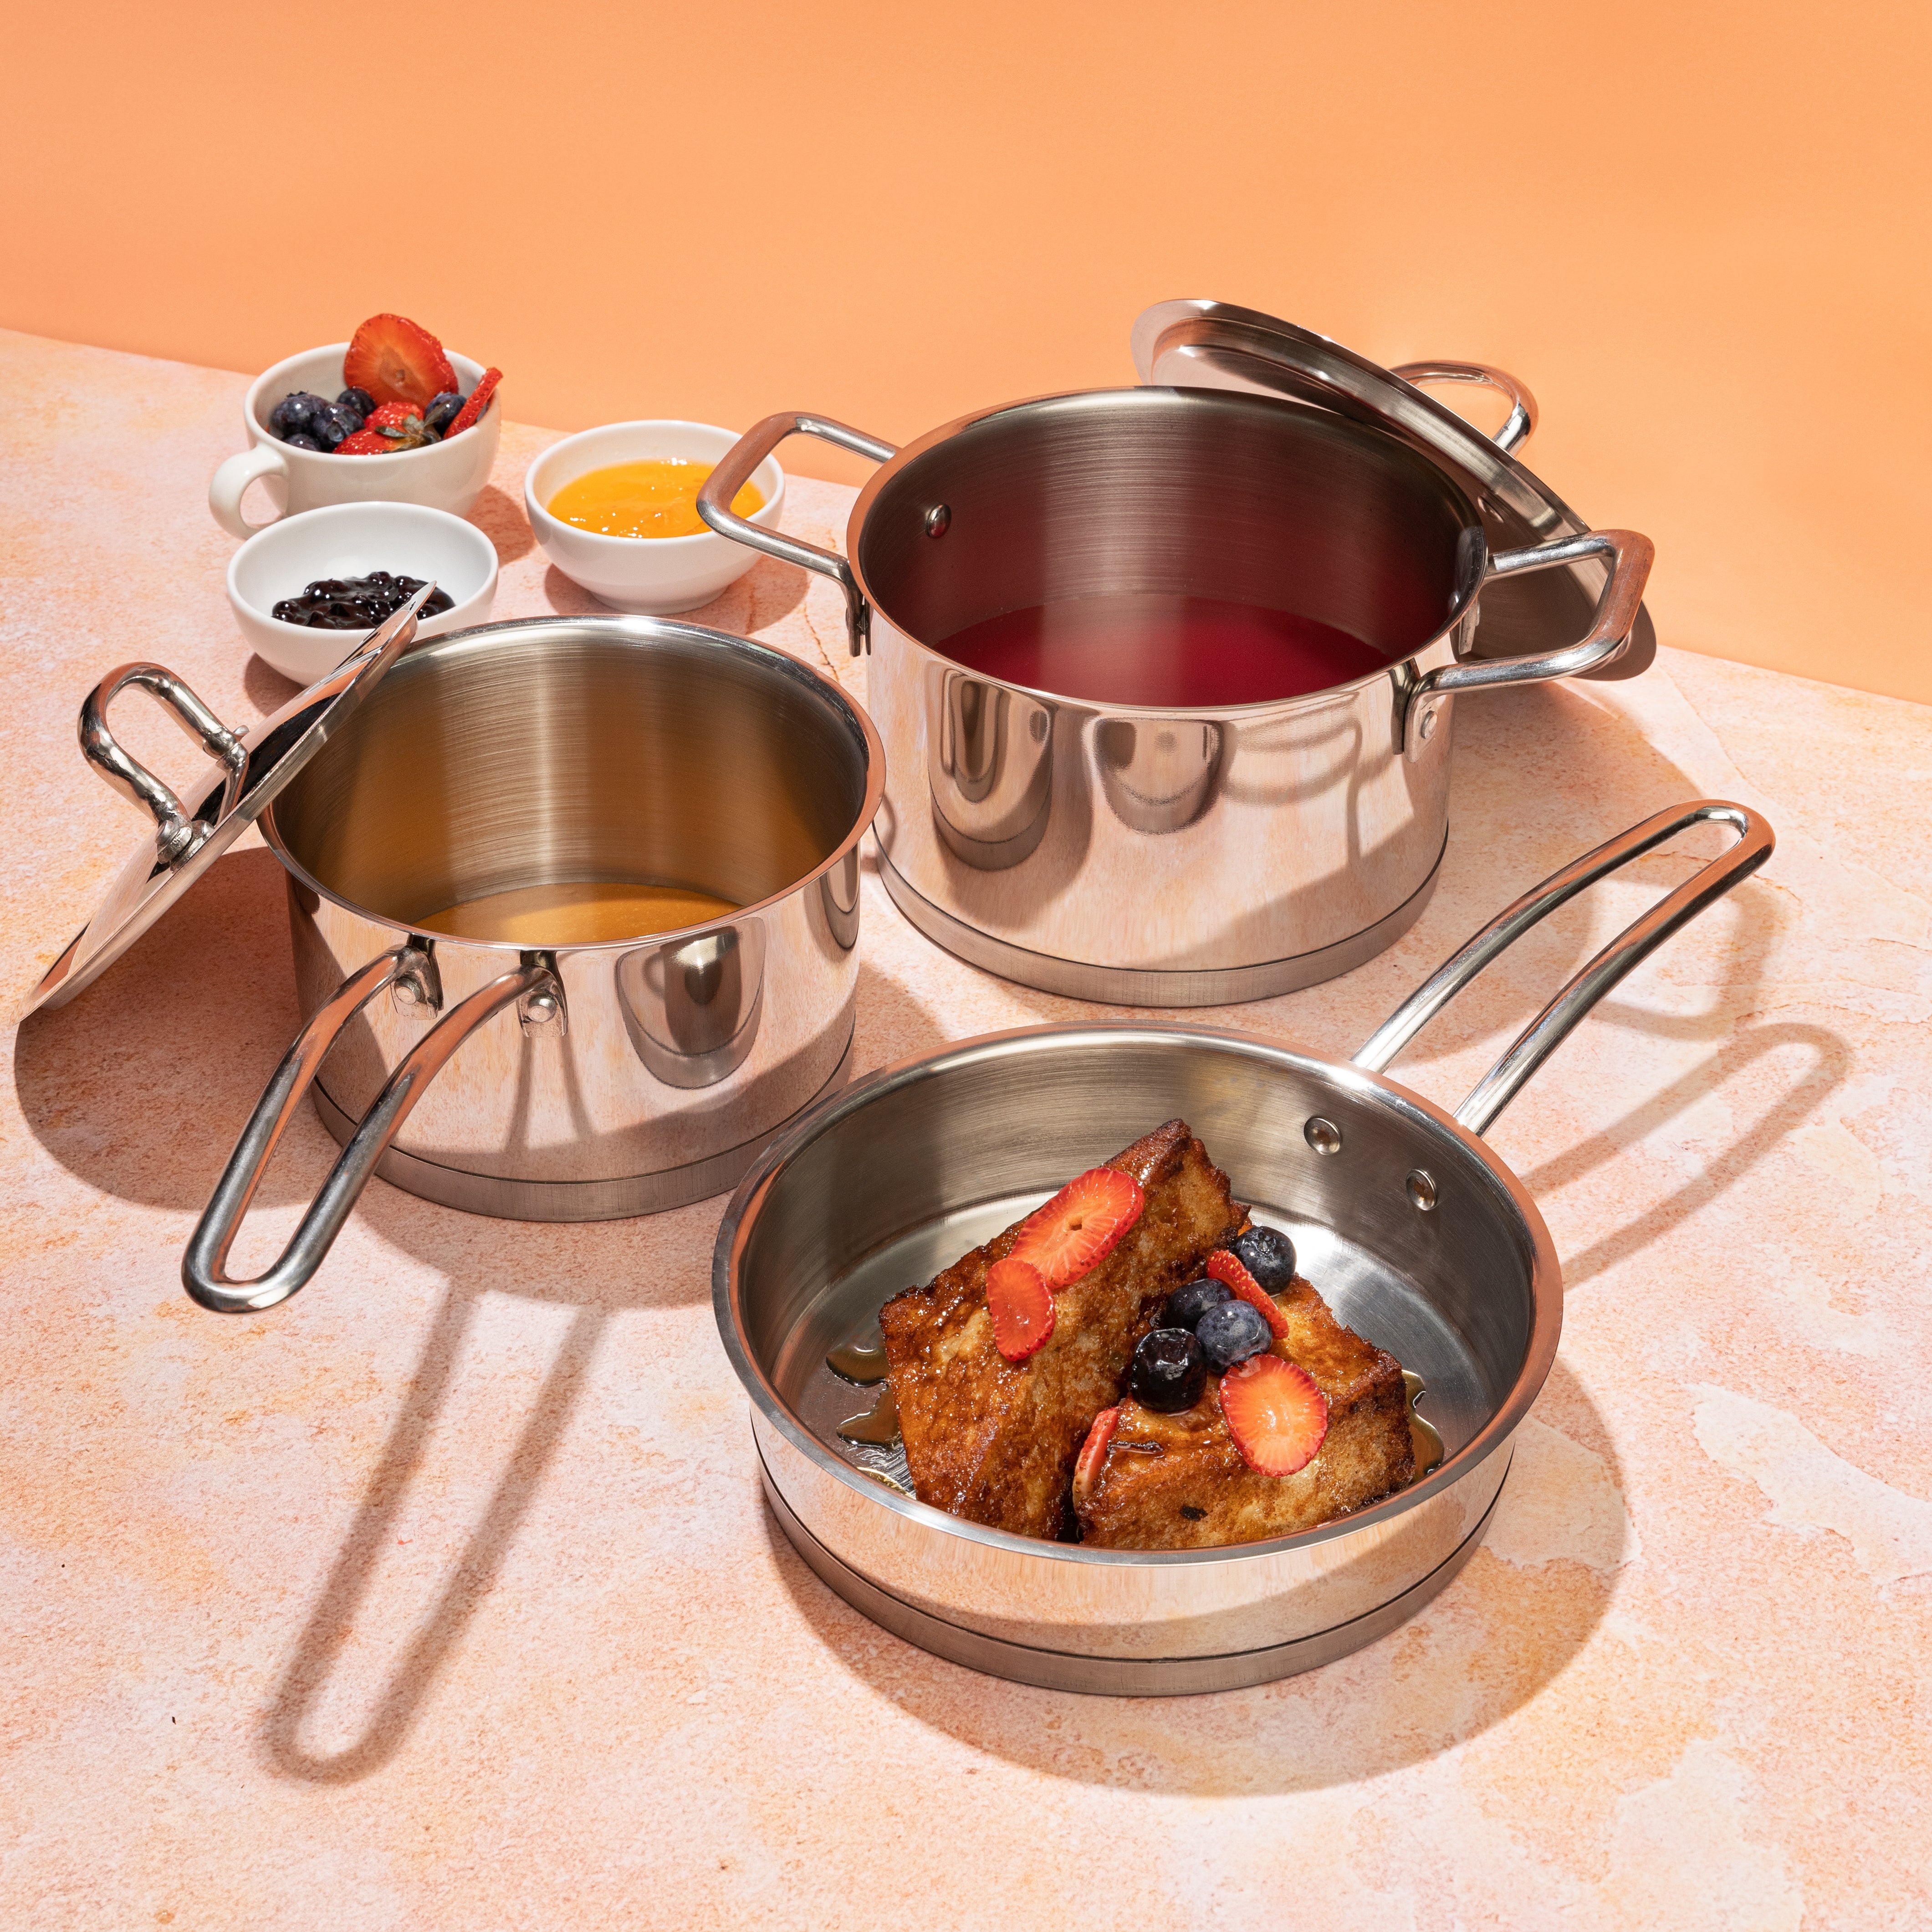 Vinod Stainless Steel Classique Deluxe Set (Induction Friendly) - 3 Pcs - Frypan with Lid, Saucepan with Lid and Saucepot with Lid